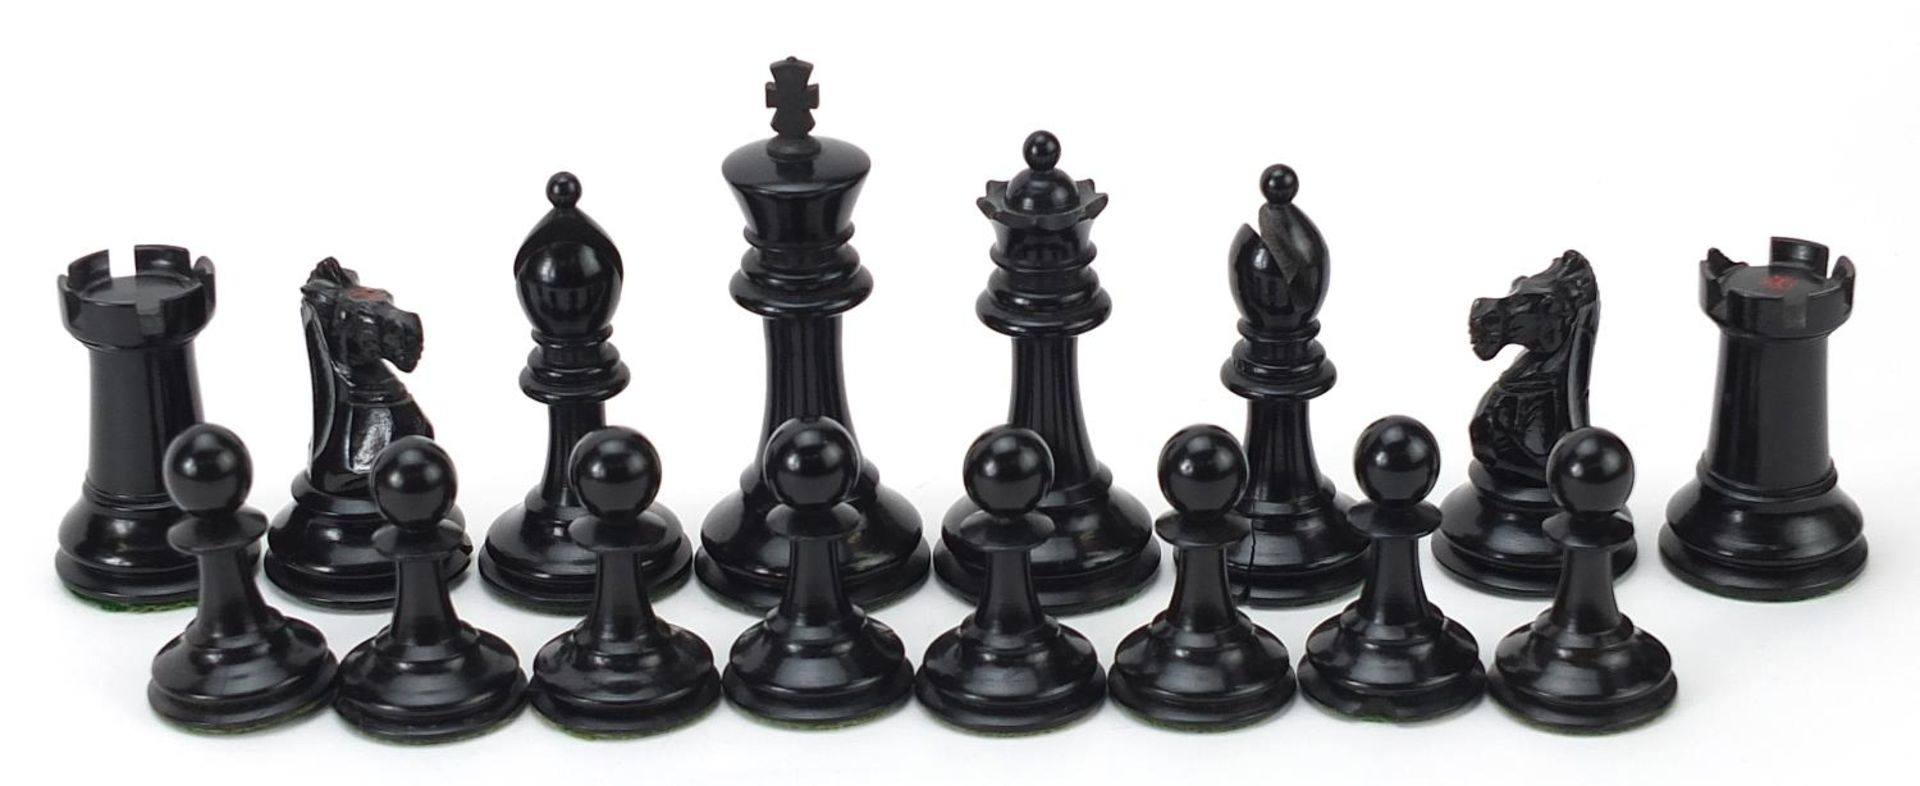 Ebony and boxwood Staunton pattern chess set with folding board, the largest pieces each 8cm high - Image 4 of 7